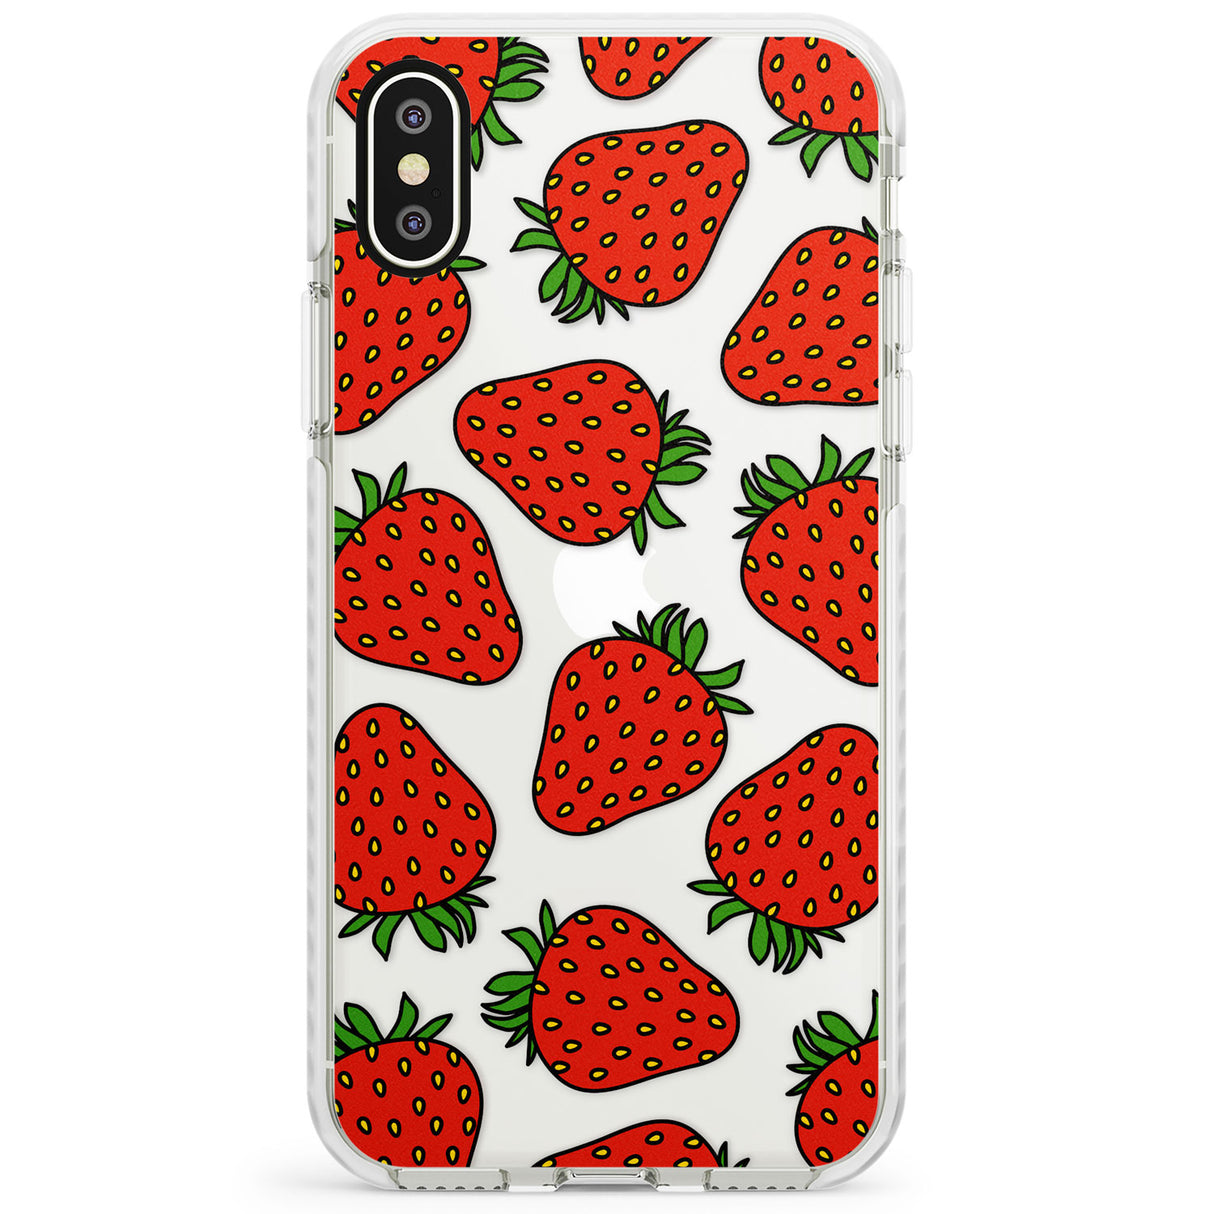 Strawberry Pattern Impact Phone Case for iPhone X XS Max XR